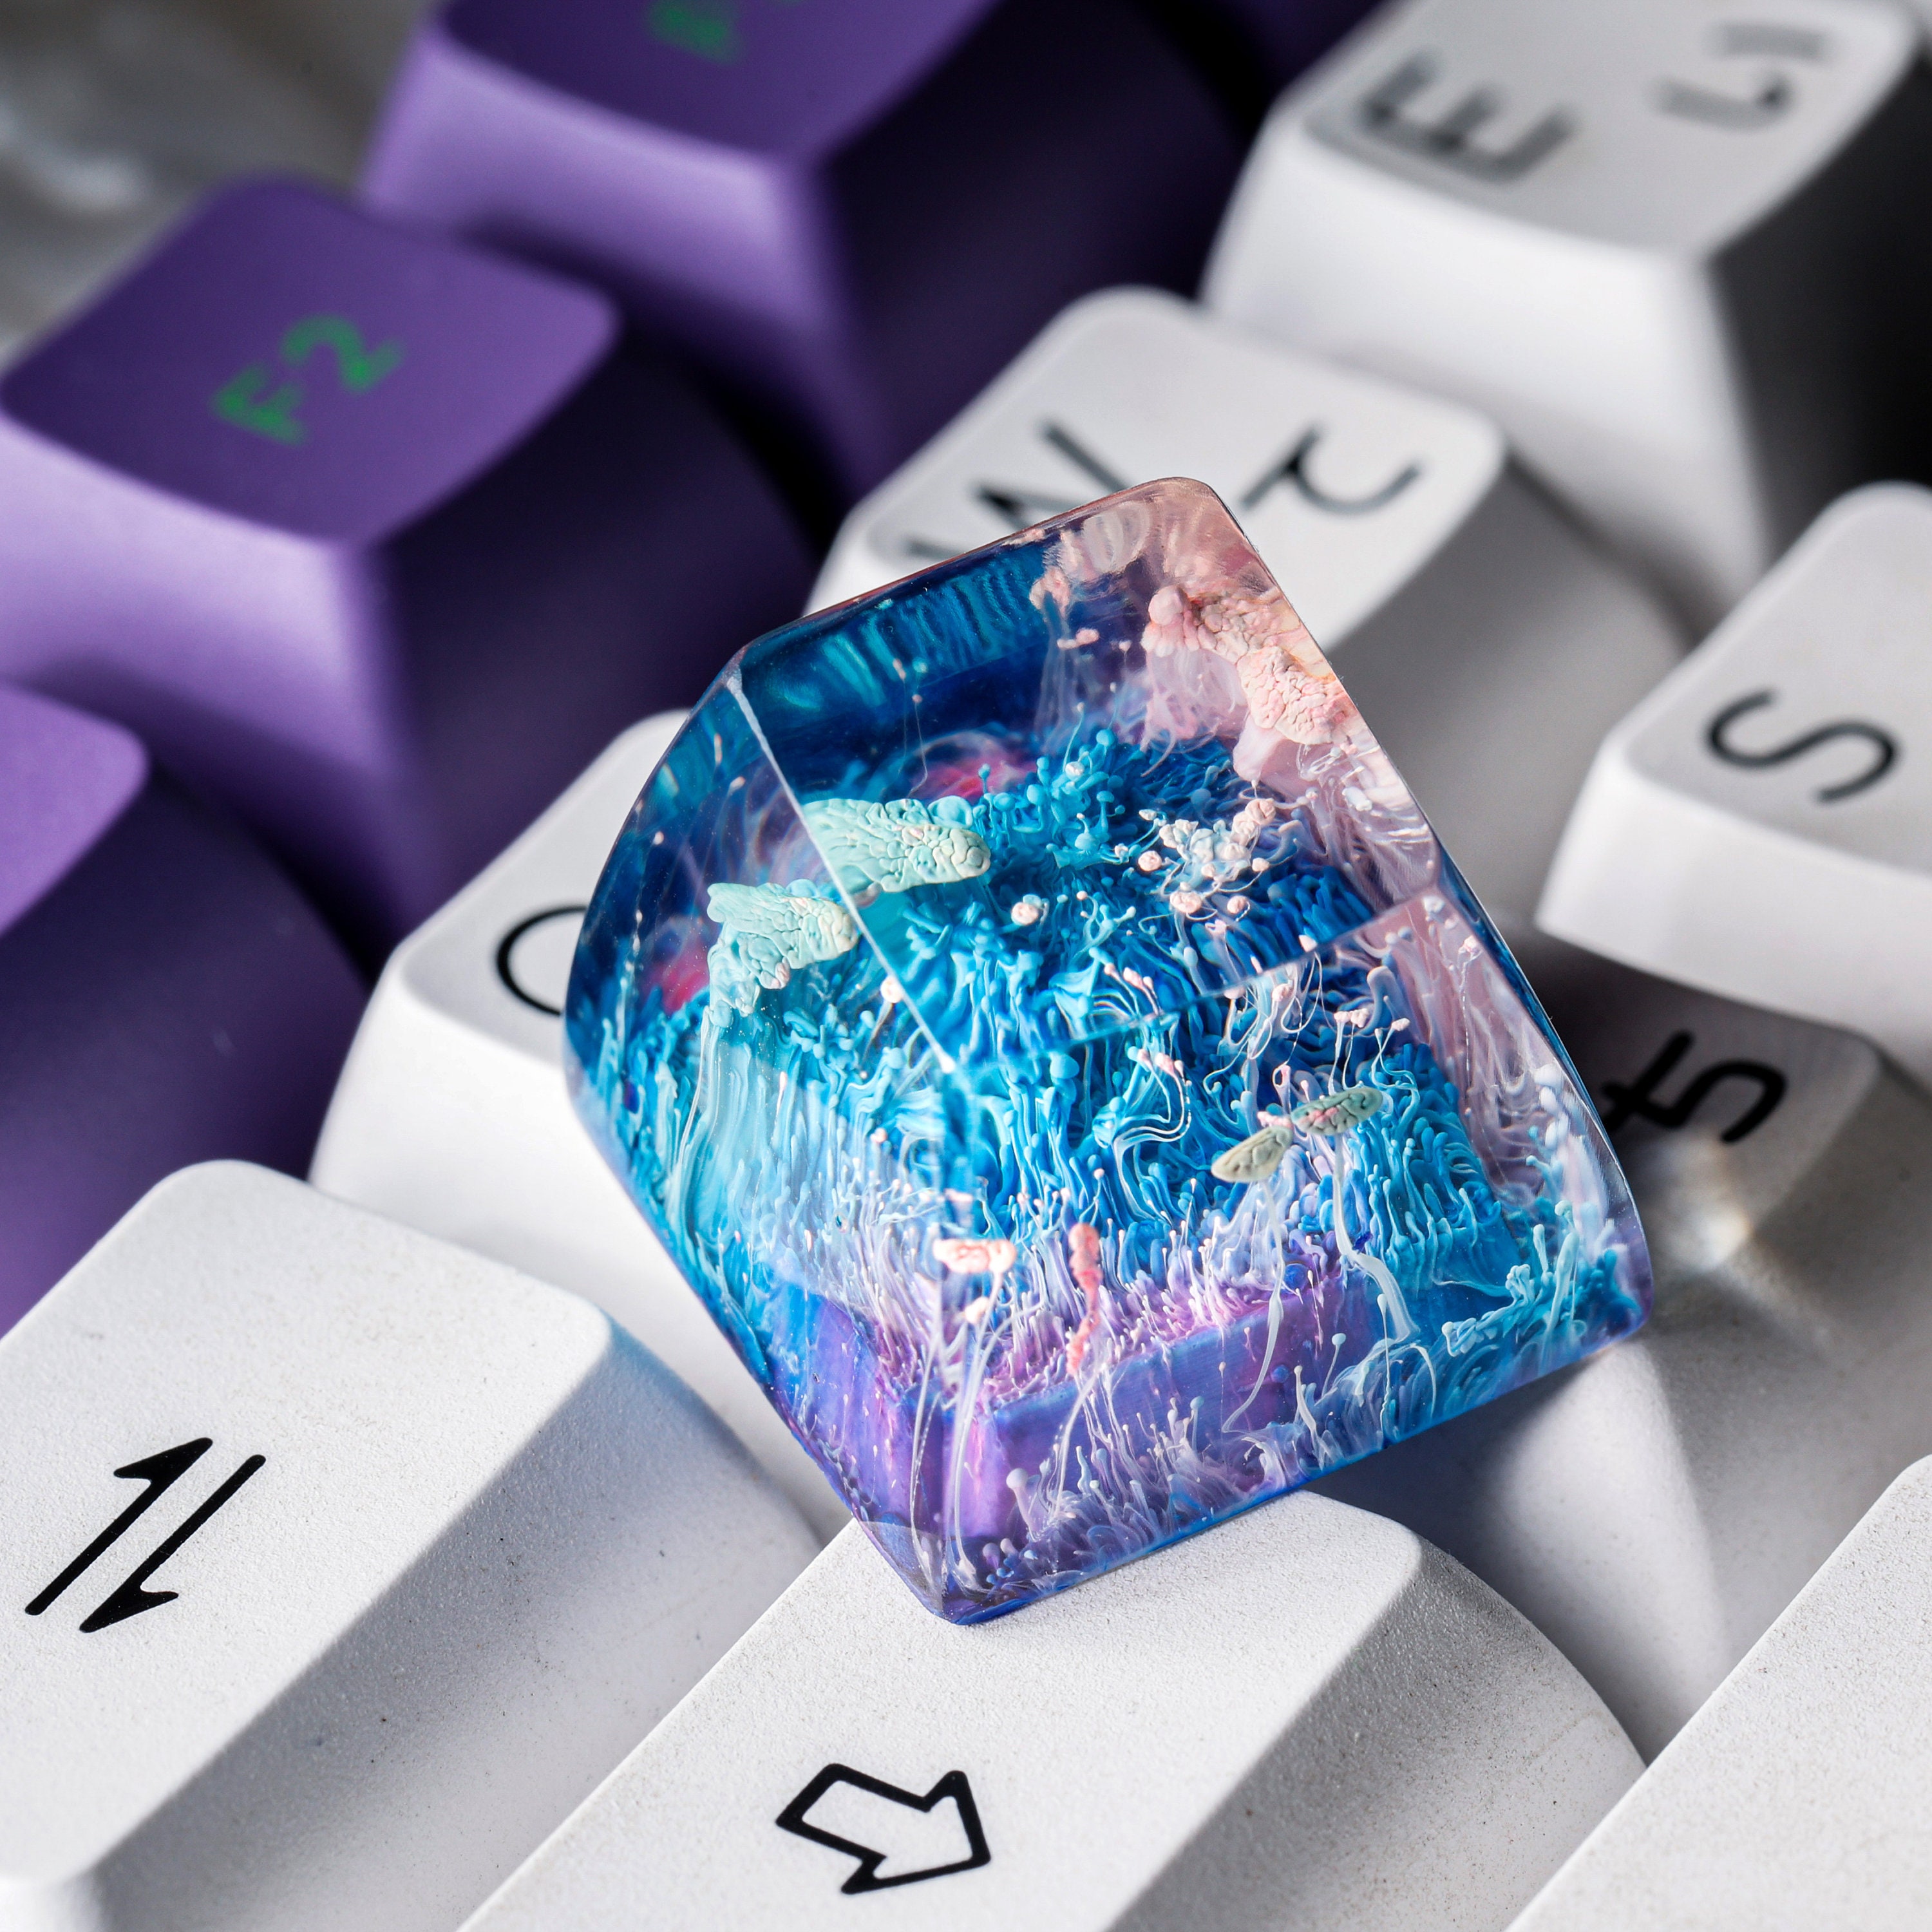 Coral Keycap, Pink & Blue Keycap, Ocean Keycap, Keycap For Cherry MX Switches Mechanical Keyboard, Handmade Gift